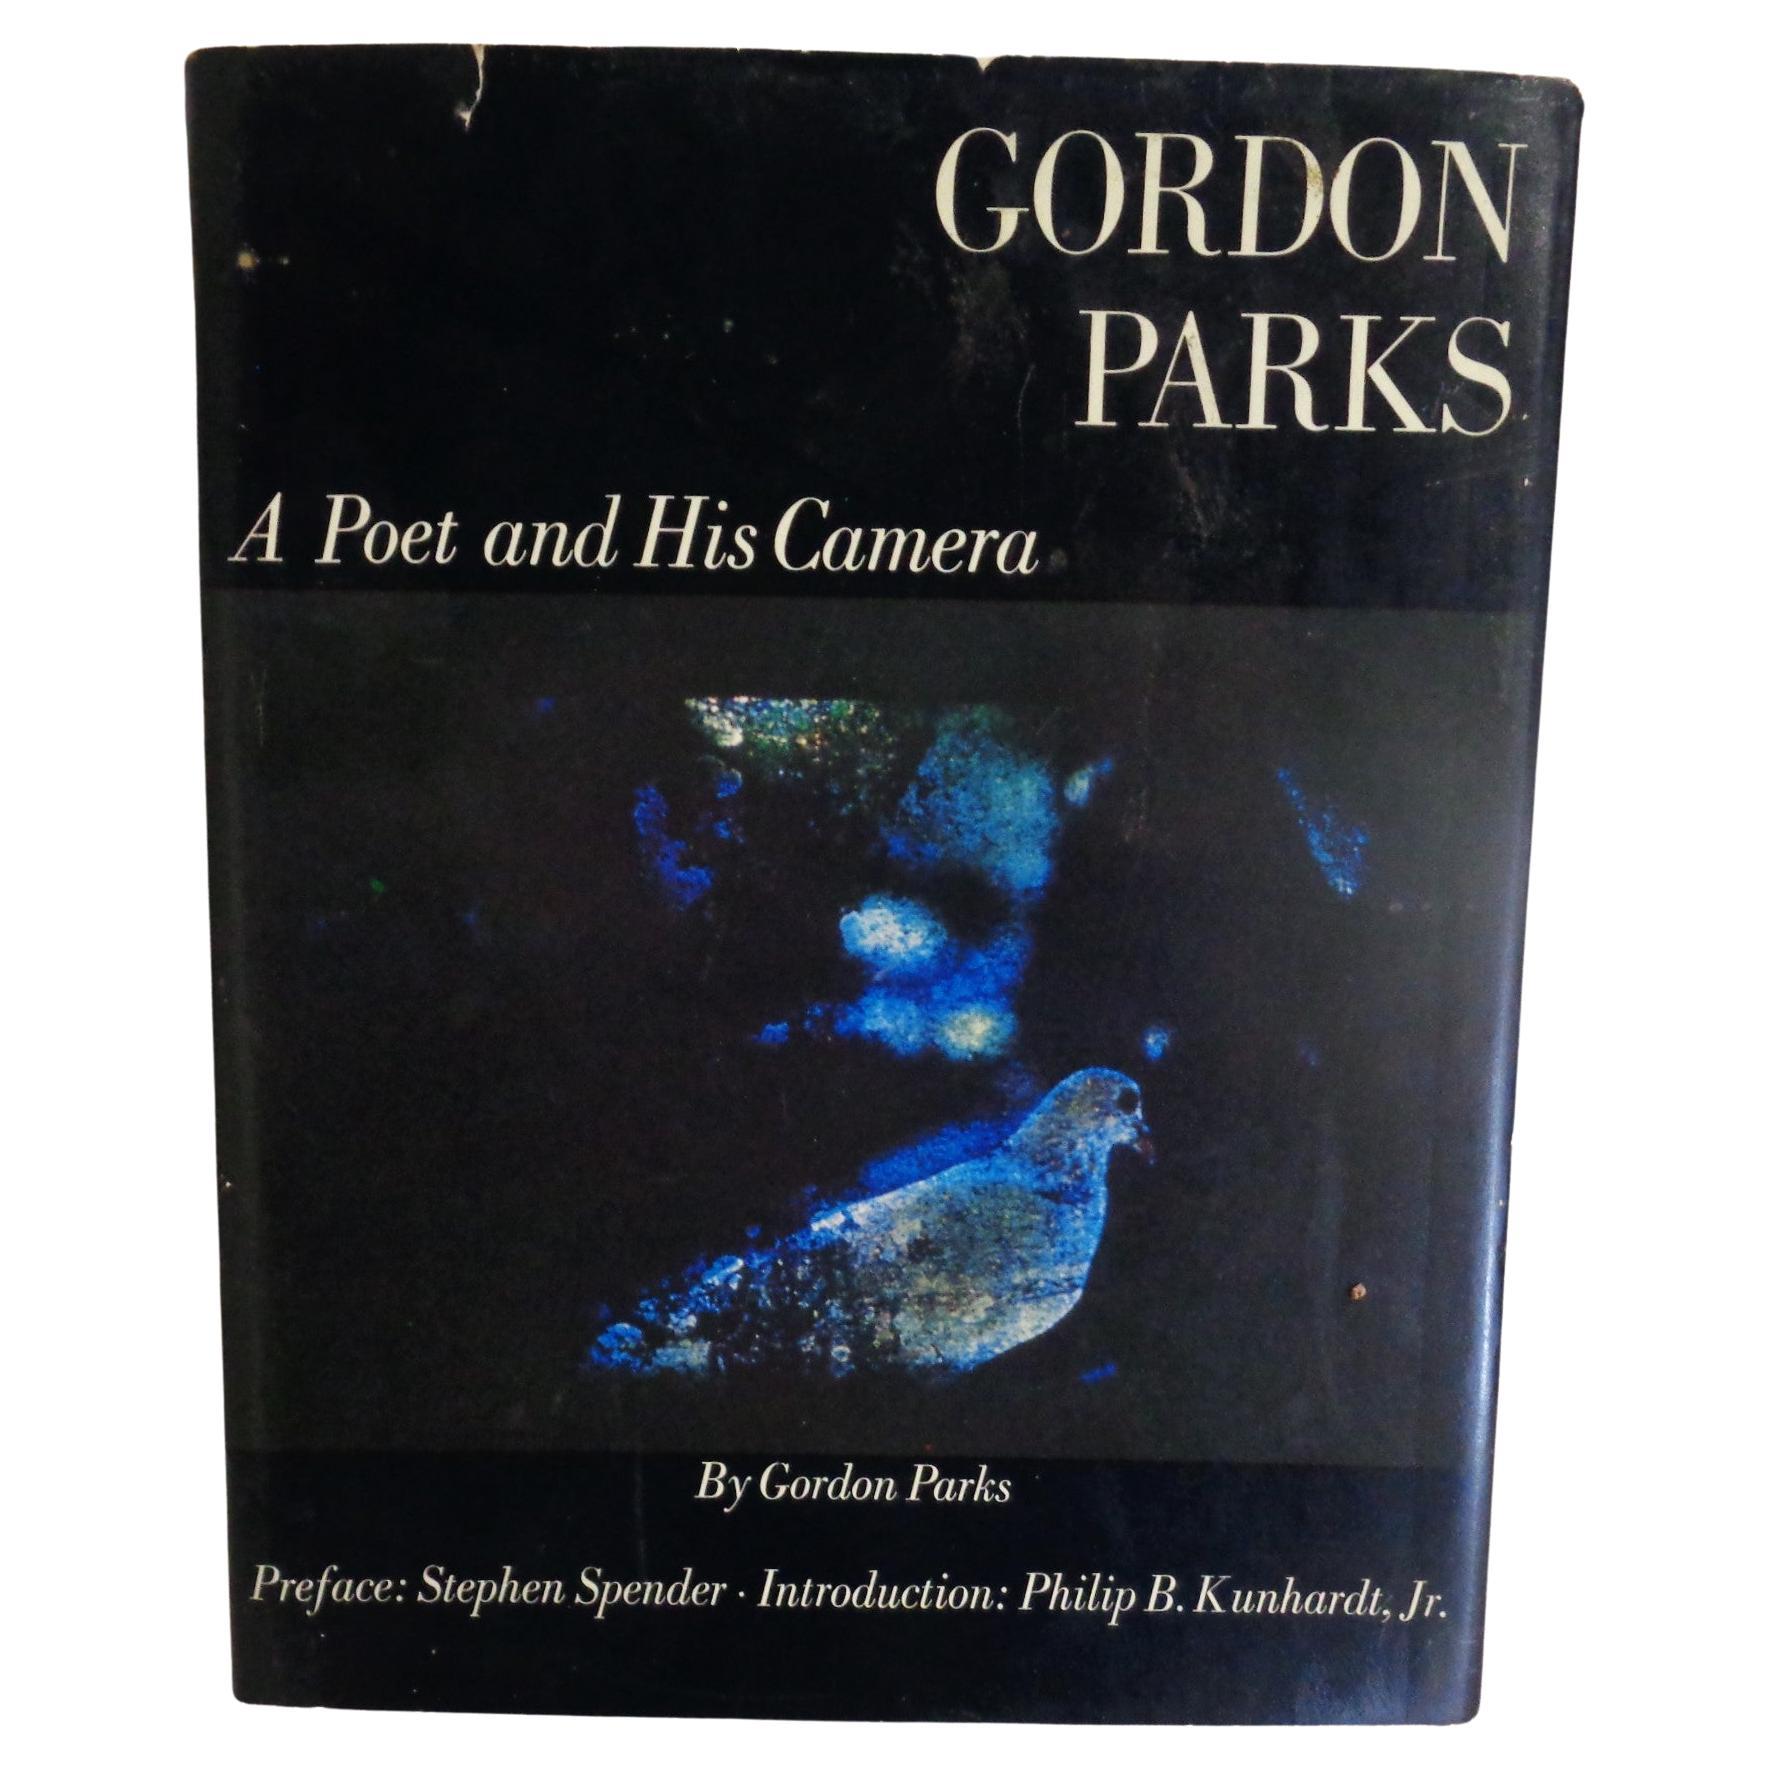 Gordon Parks - A Poet and His Camera - Gordon Parks - 1968 Viking - 1st Edition For Sale